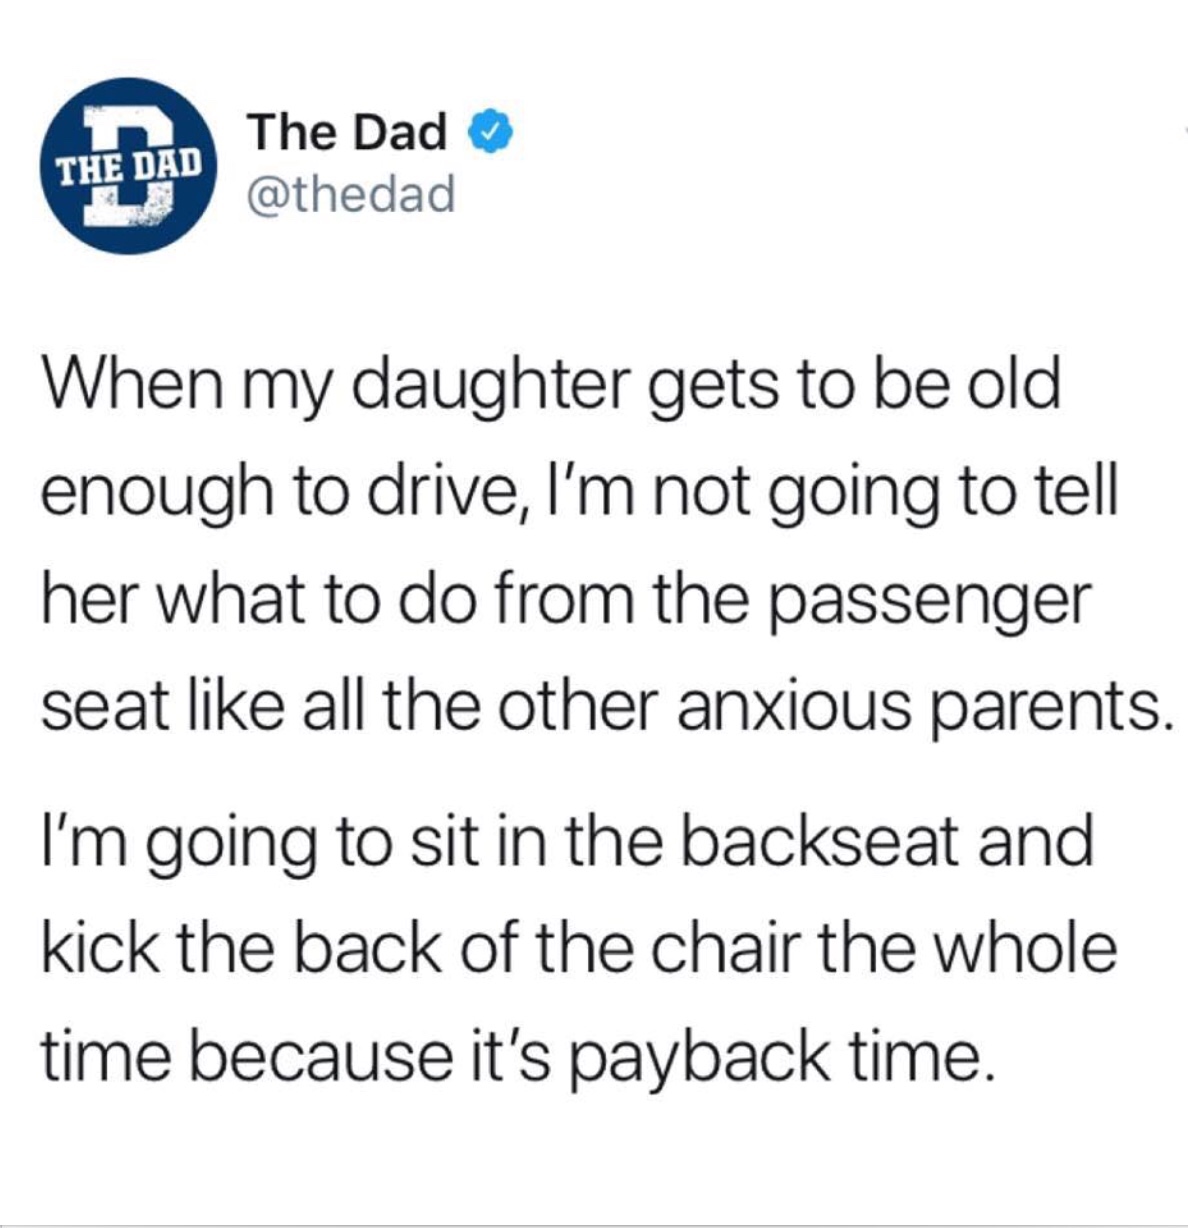 memes - angle - The Dad The Dad When my daughter gets to be old enough to drive, I'm not going to tell her what to do from the passenger seat all the other anxious parents. I'm going to sit in the backseat and kick the back of the chair the whole time bec